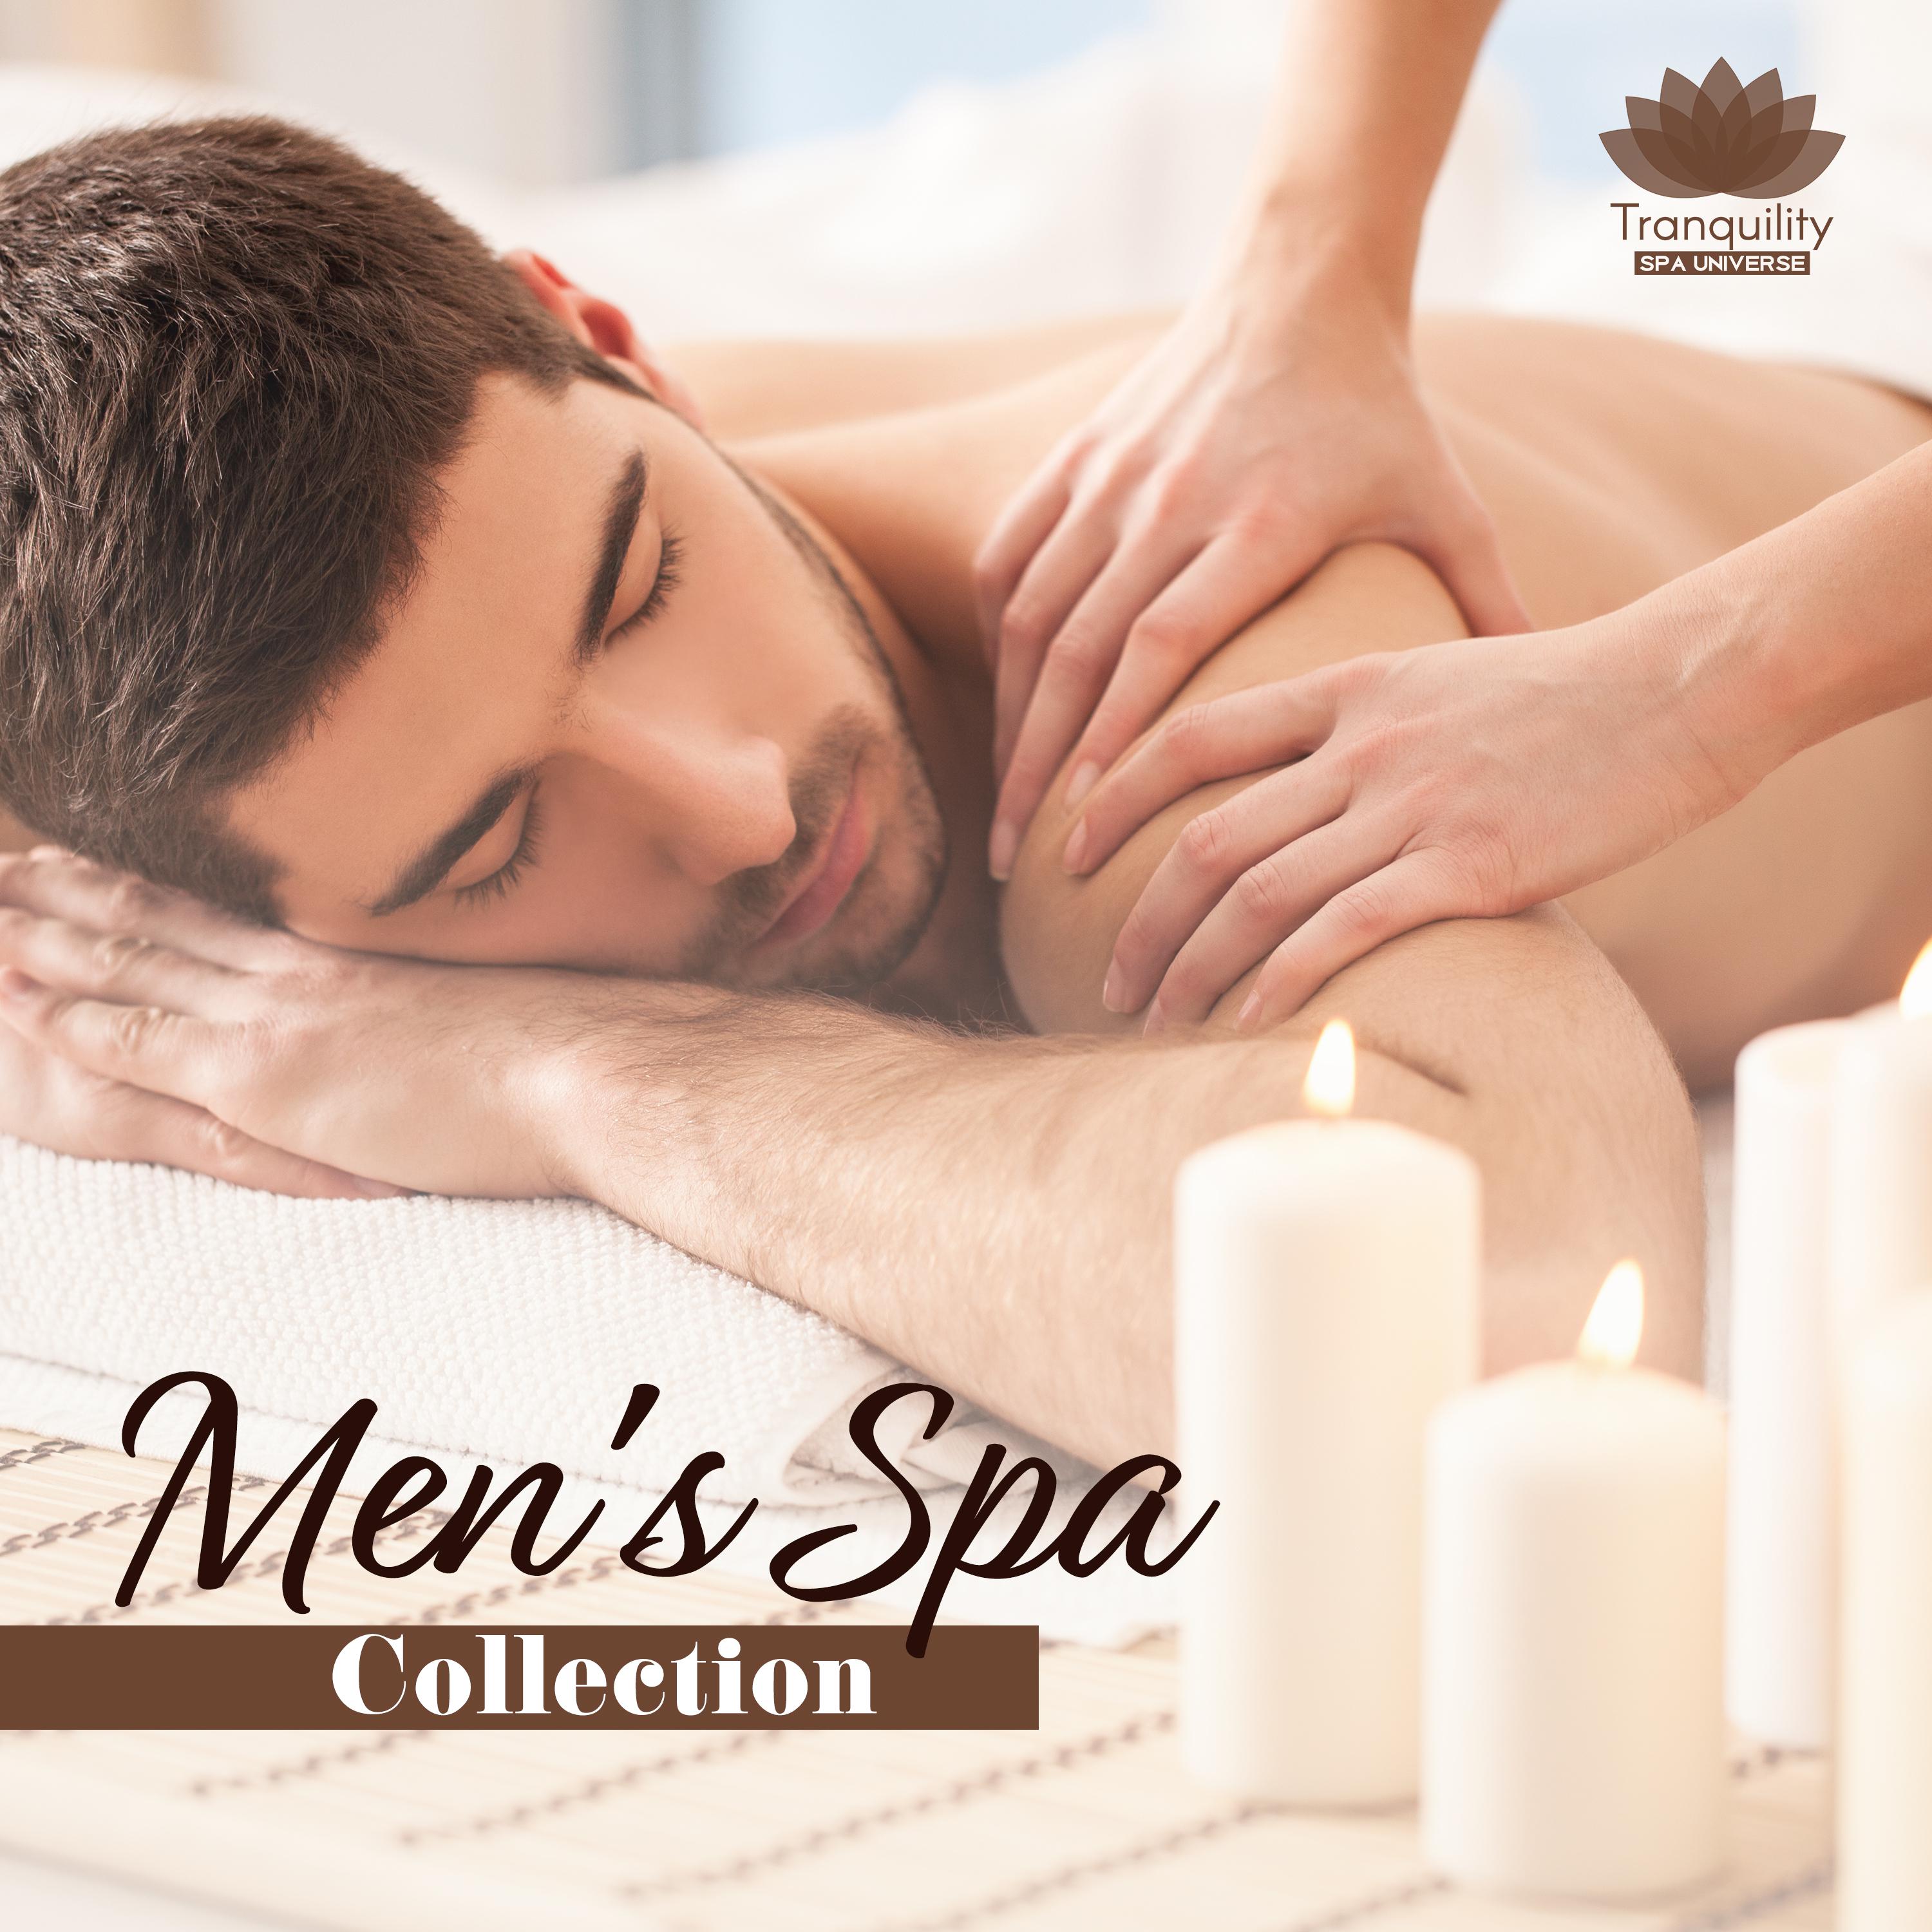 Men's Spa Collection